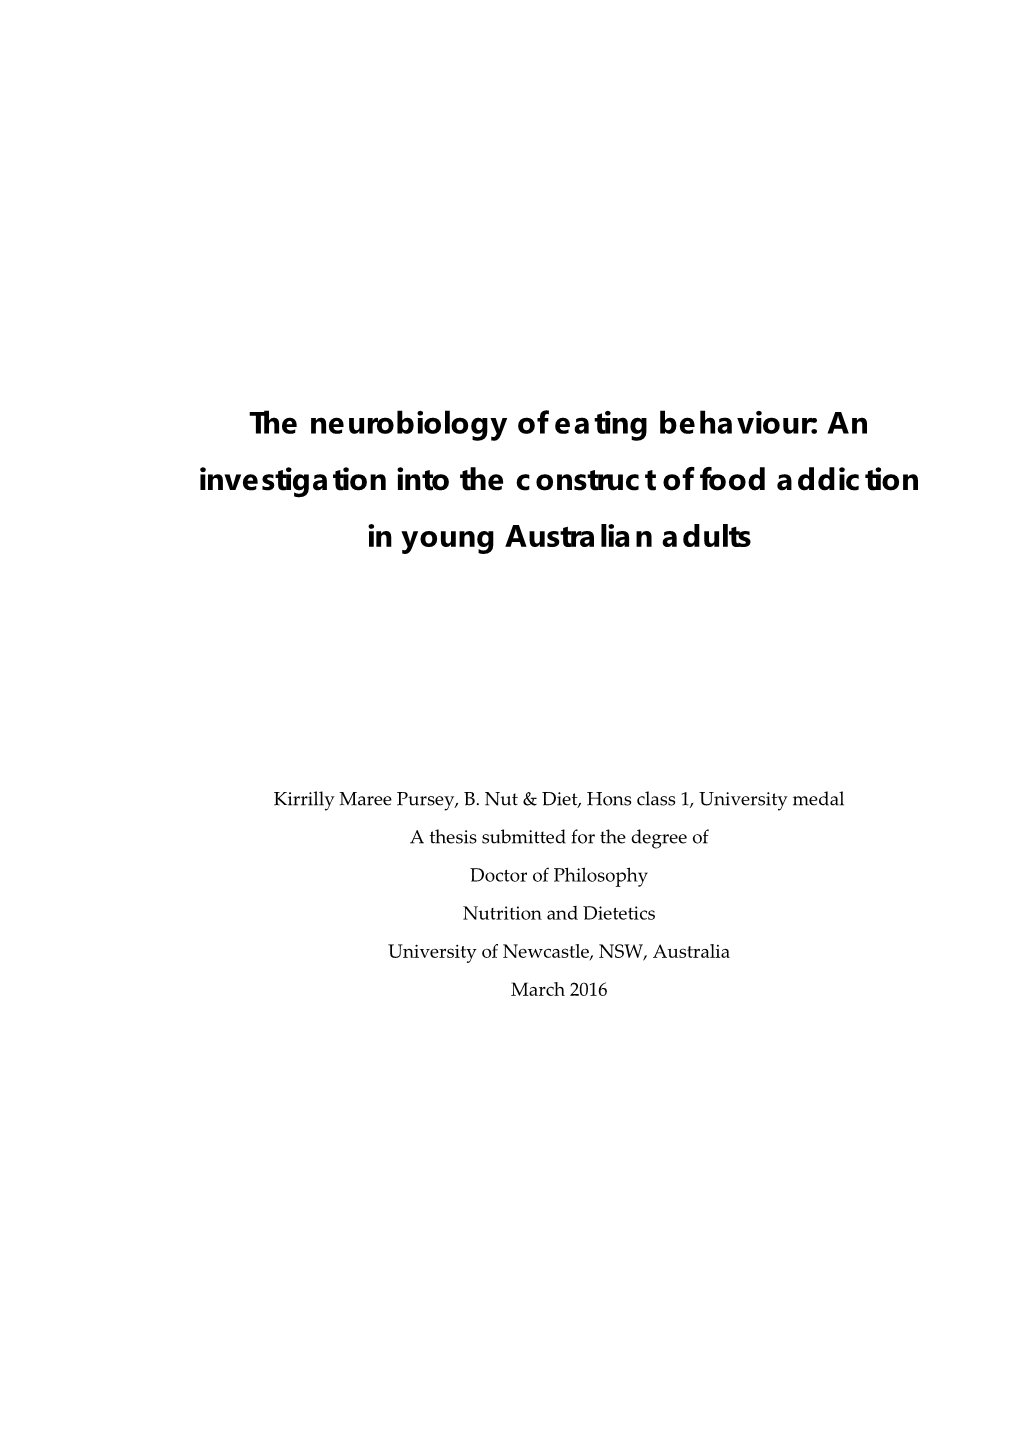 Food Addiction in Young Australian Adults